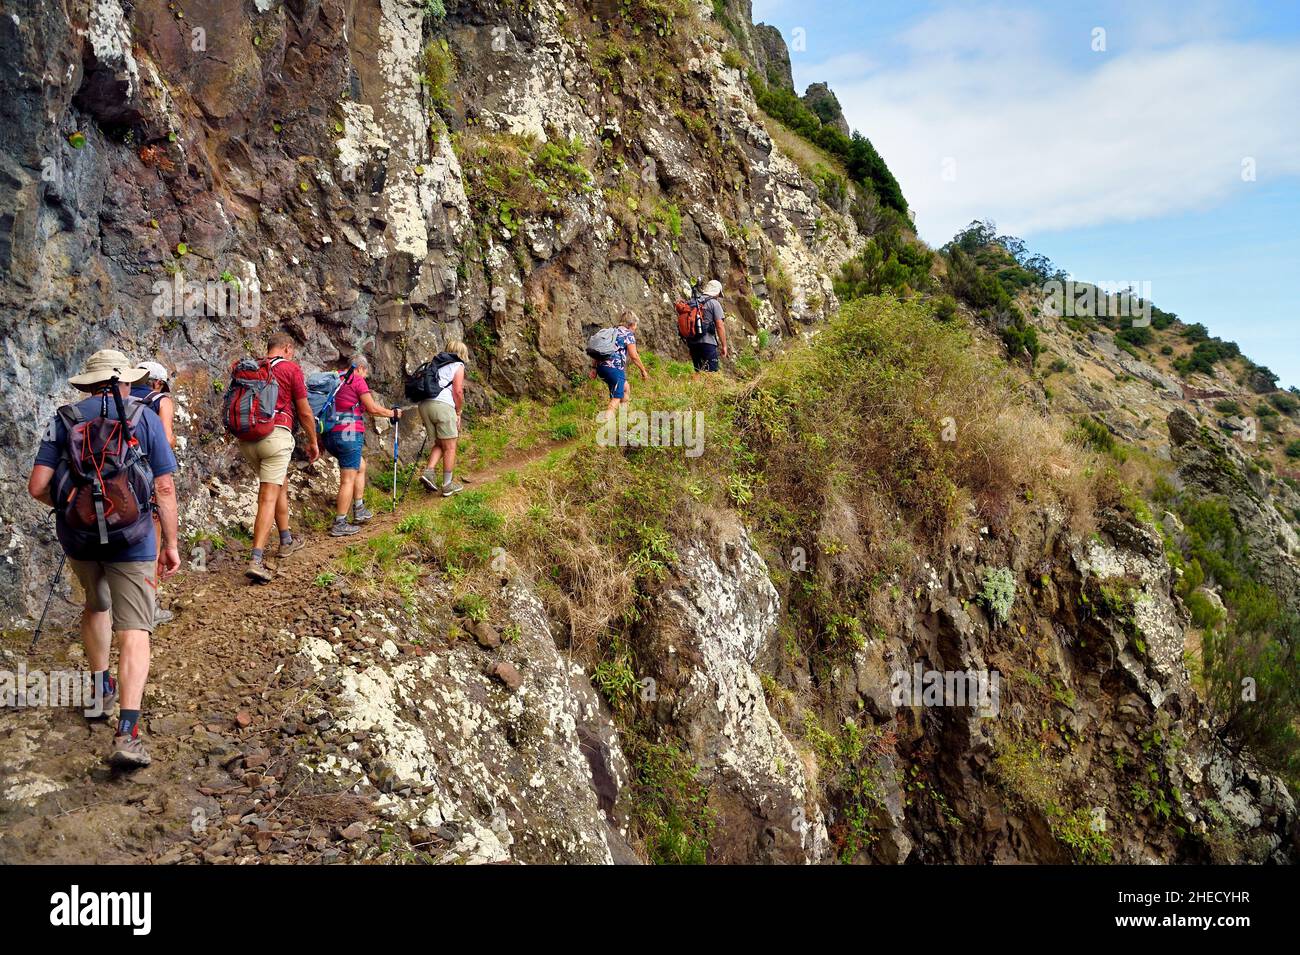 Portugal, Madeira Island, hike from Machico to Porto da Cruz by the Vereda do Larano, hikers on the path carved into the side of the wall of the cliff of Larano Stock Photo